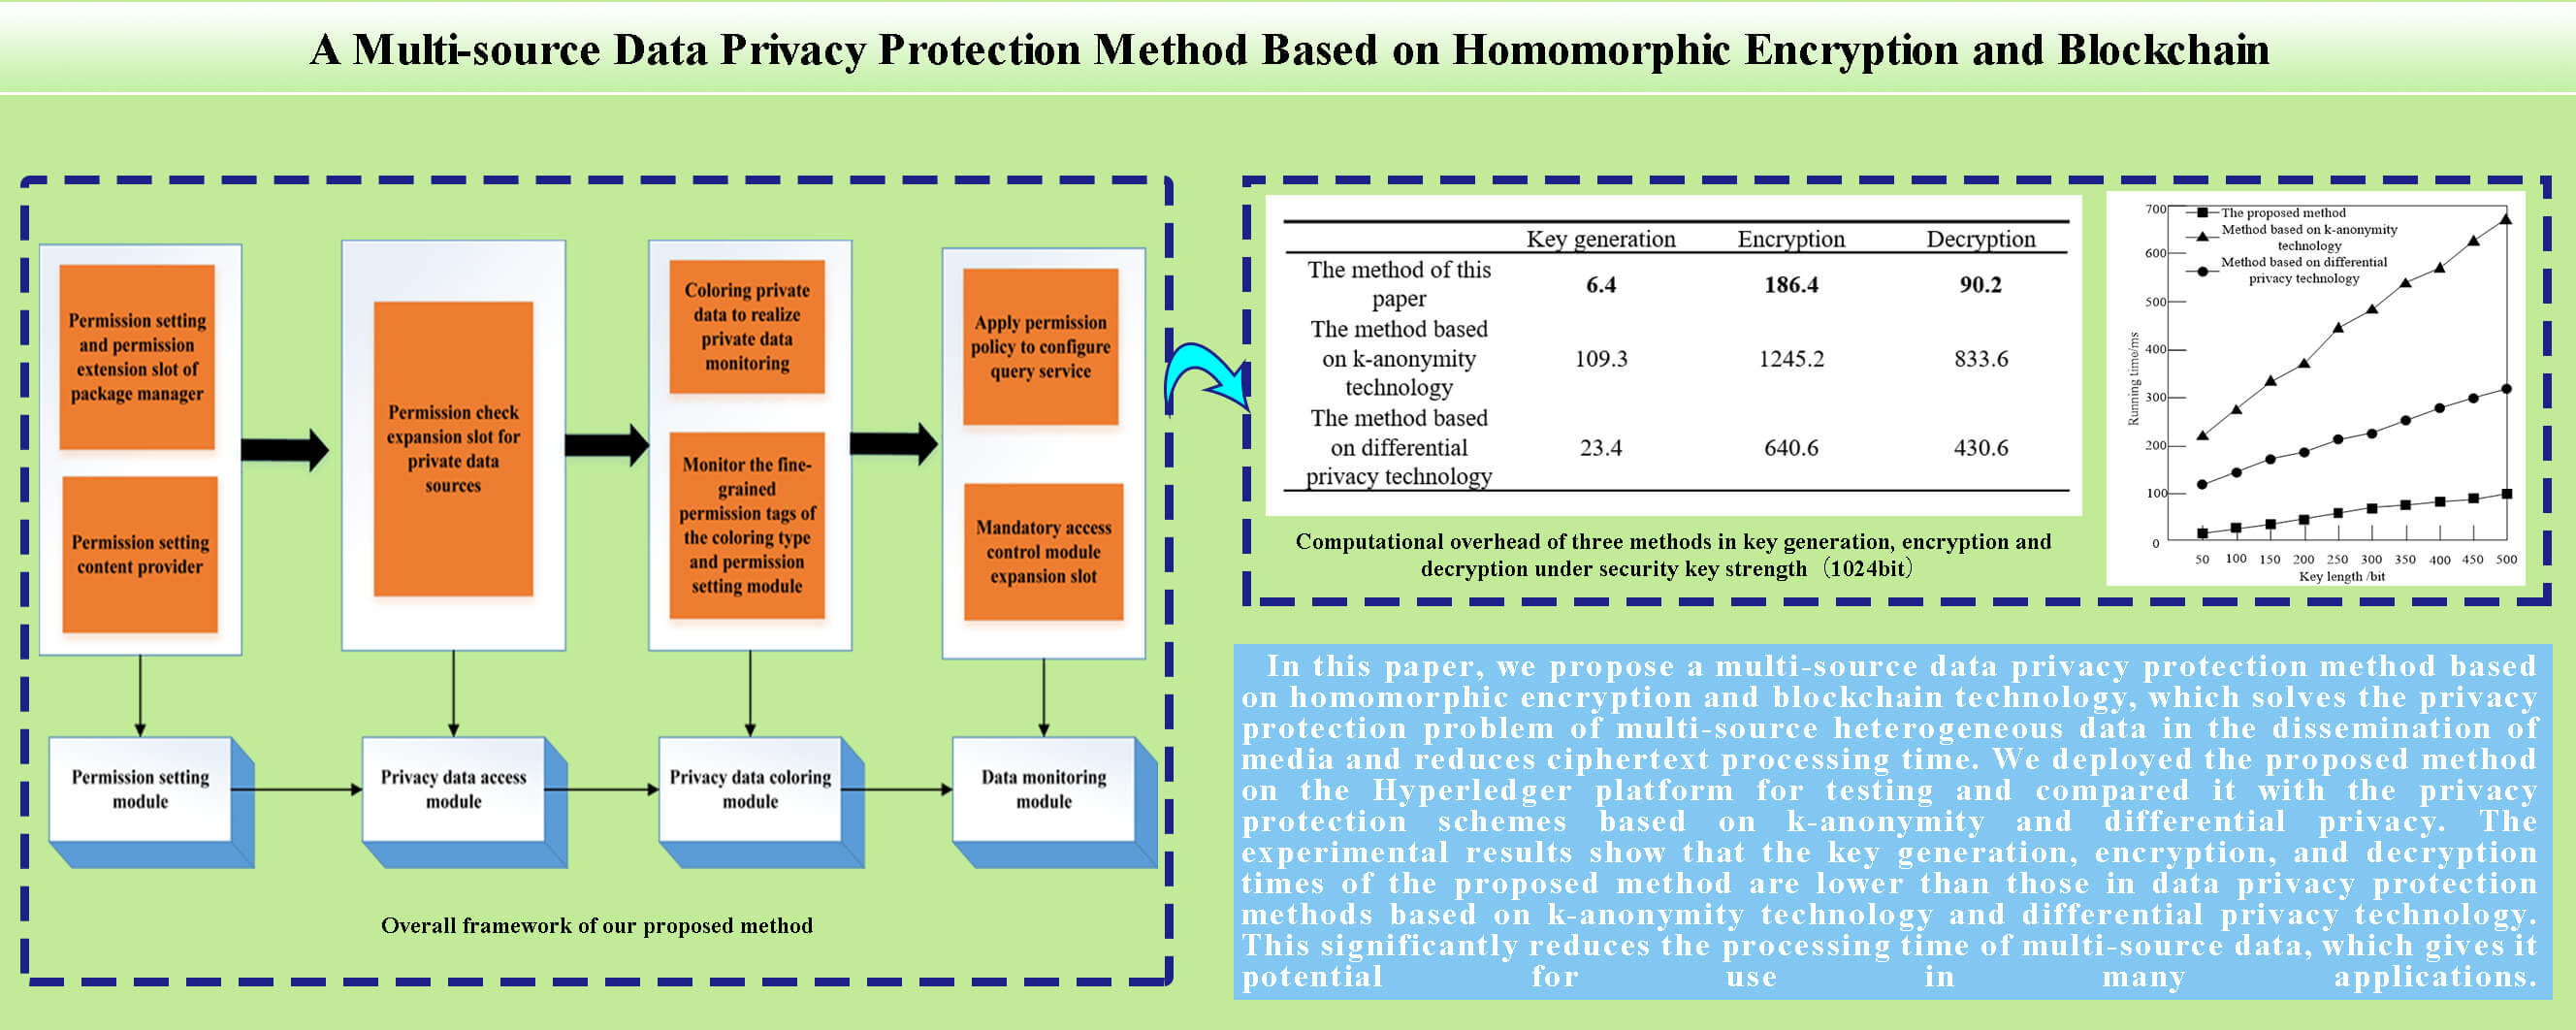 Multi-Source Data Privacy Protection Method Based on Homomorphic Encryption and Blockchain